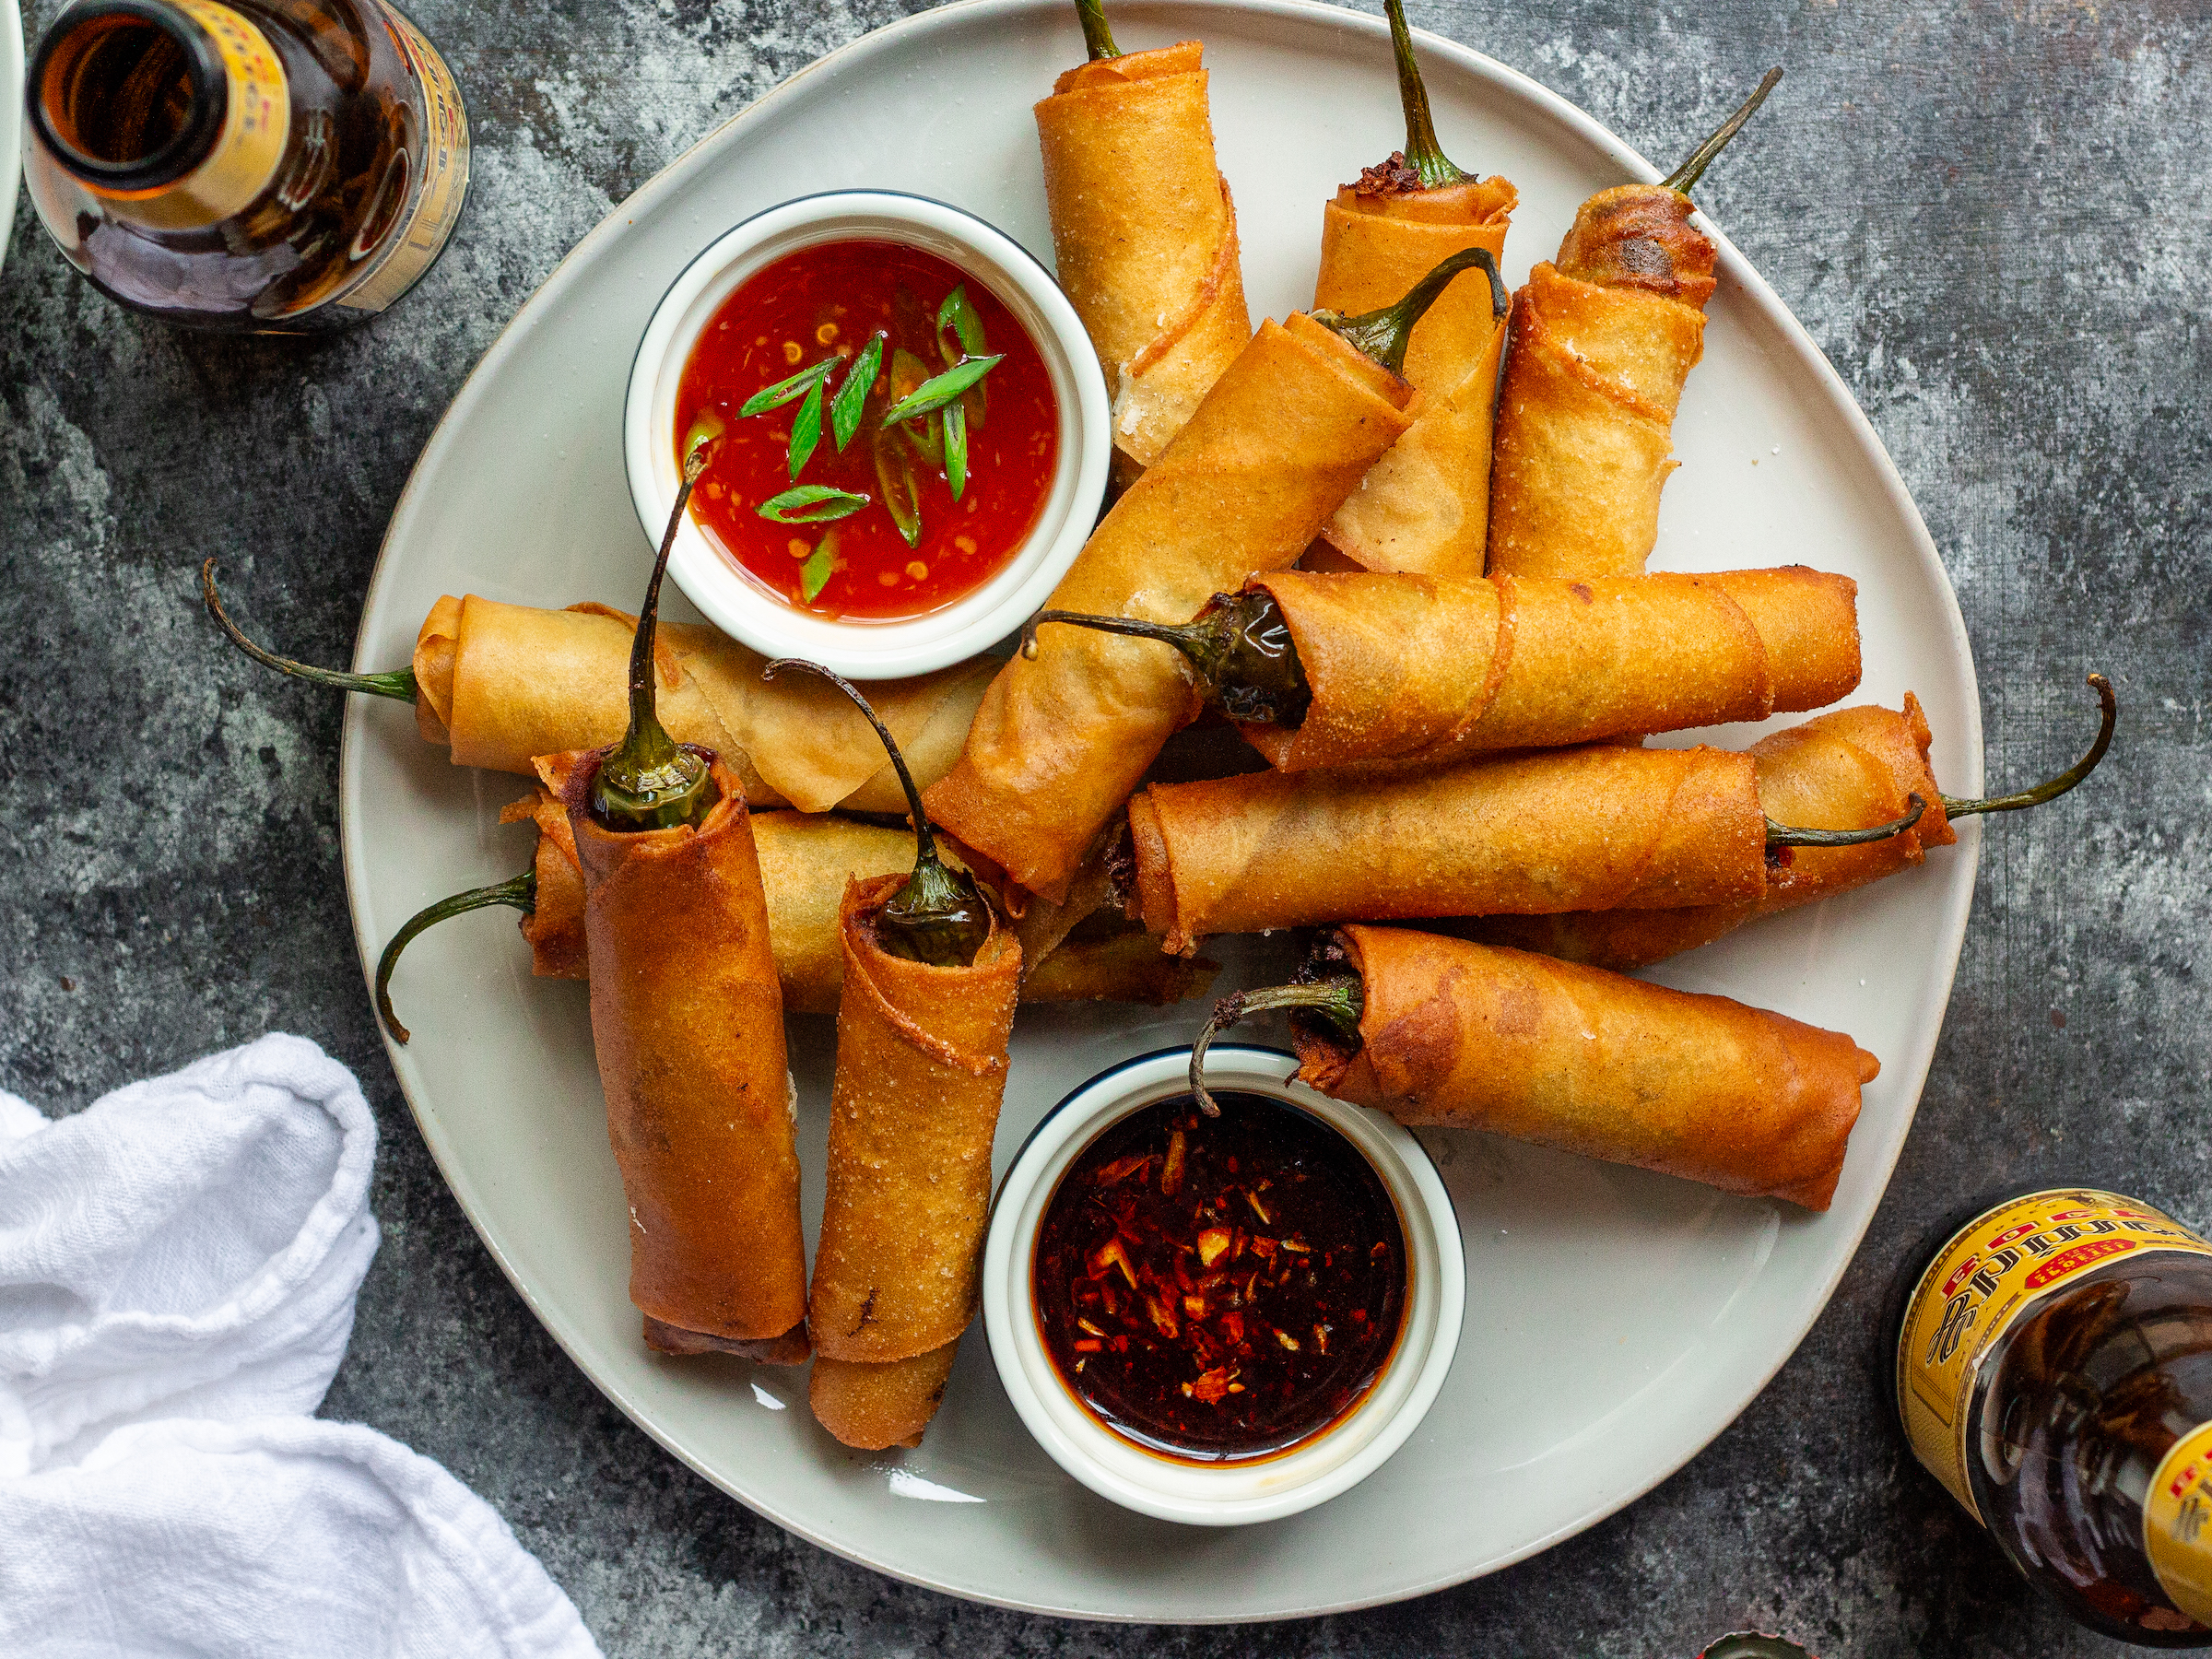 We're open tonight for MONDAY NIGHT FOOTBALL! We will have Lumpia